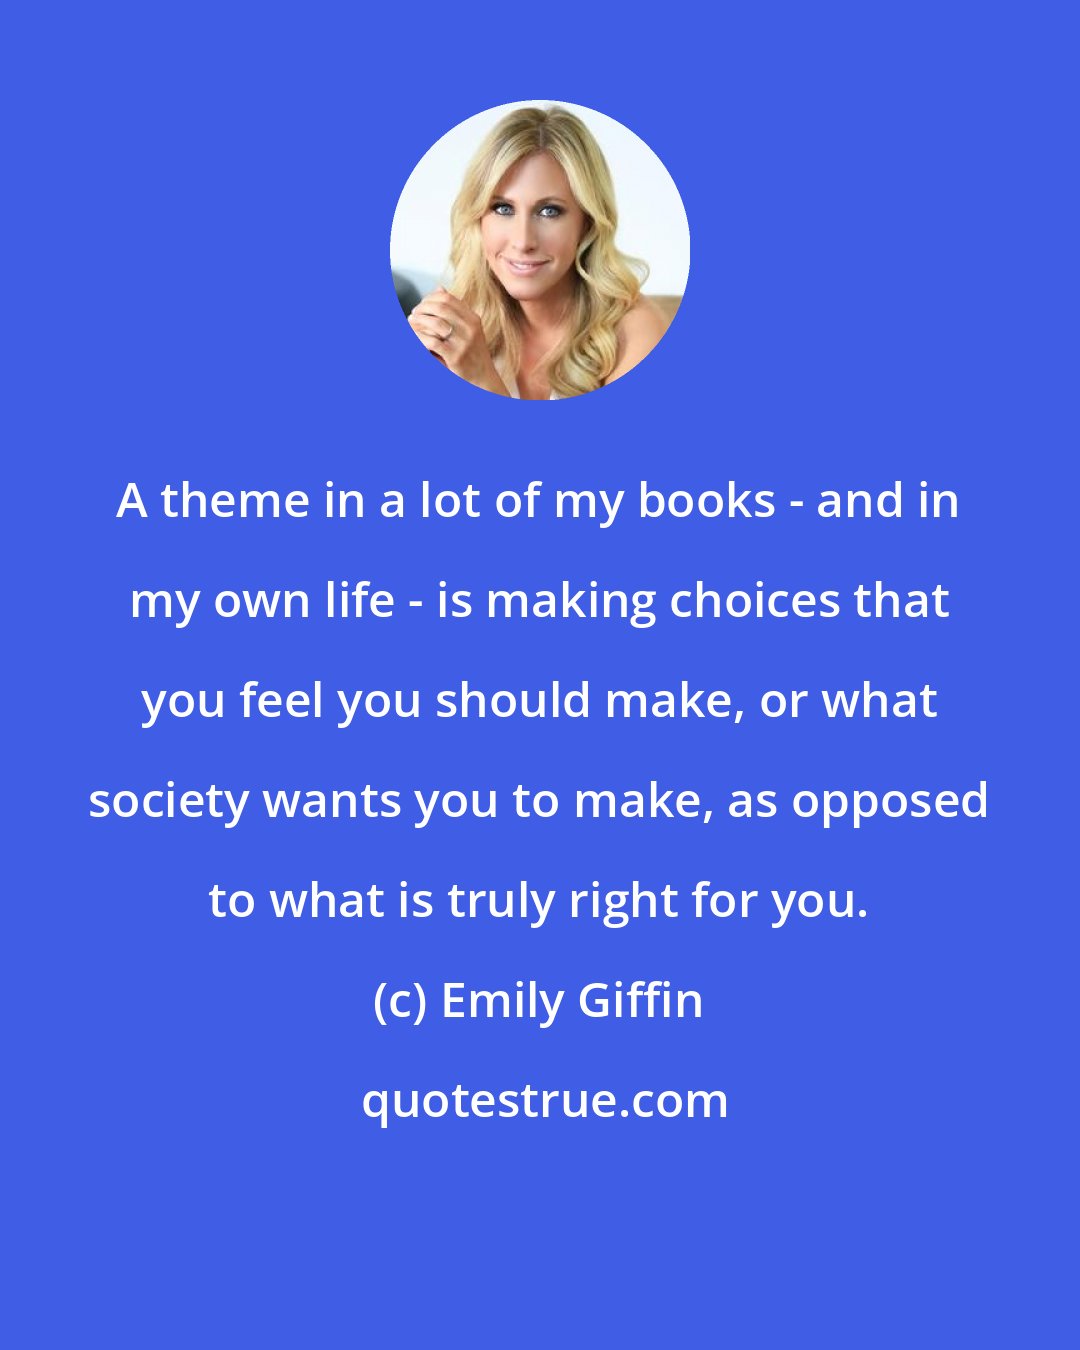 Emily Giffin: A theme in a lot of my books - and in my own life - is making choices that you feel you should make, or what society wants you to make, as opposed to what is truly right for you.